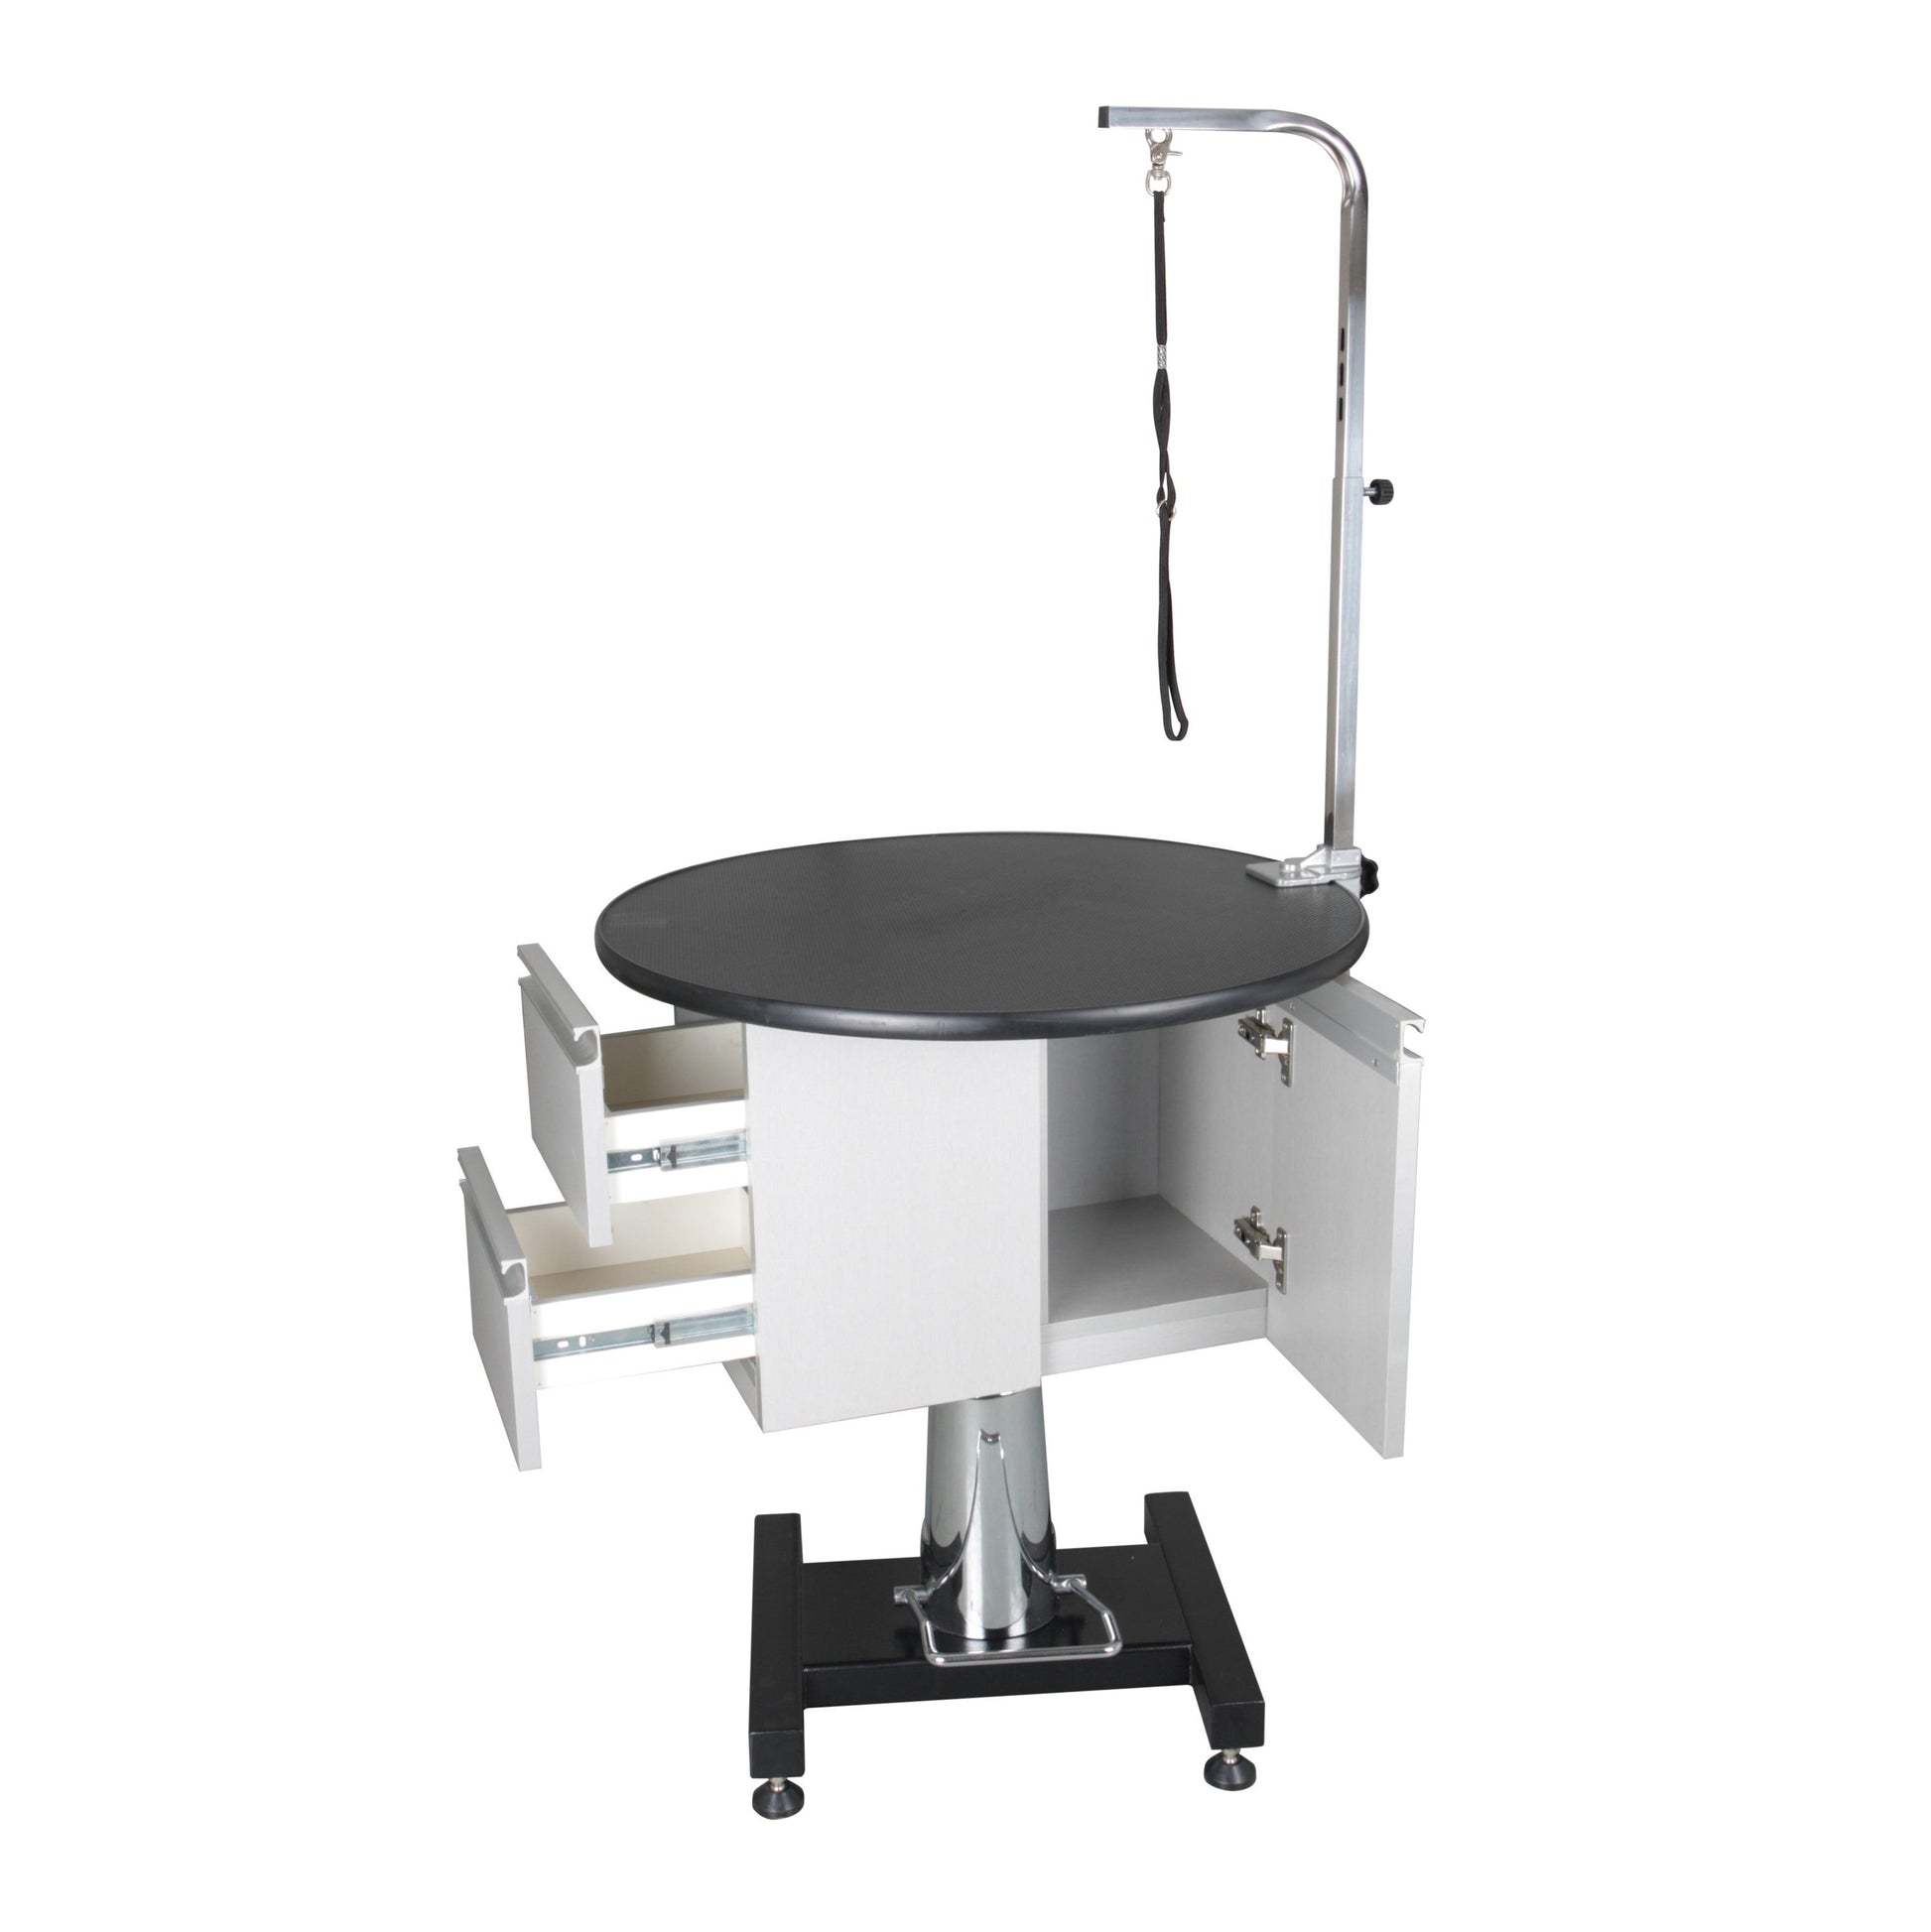 Aeolus Round Rotational Hydraulic Grooming Table with Cabinets-Grooming Tables-Pet's Choice Supply